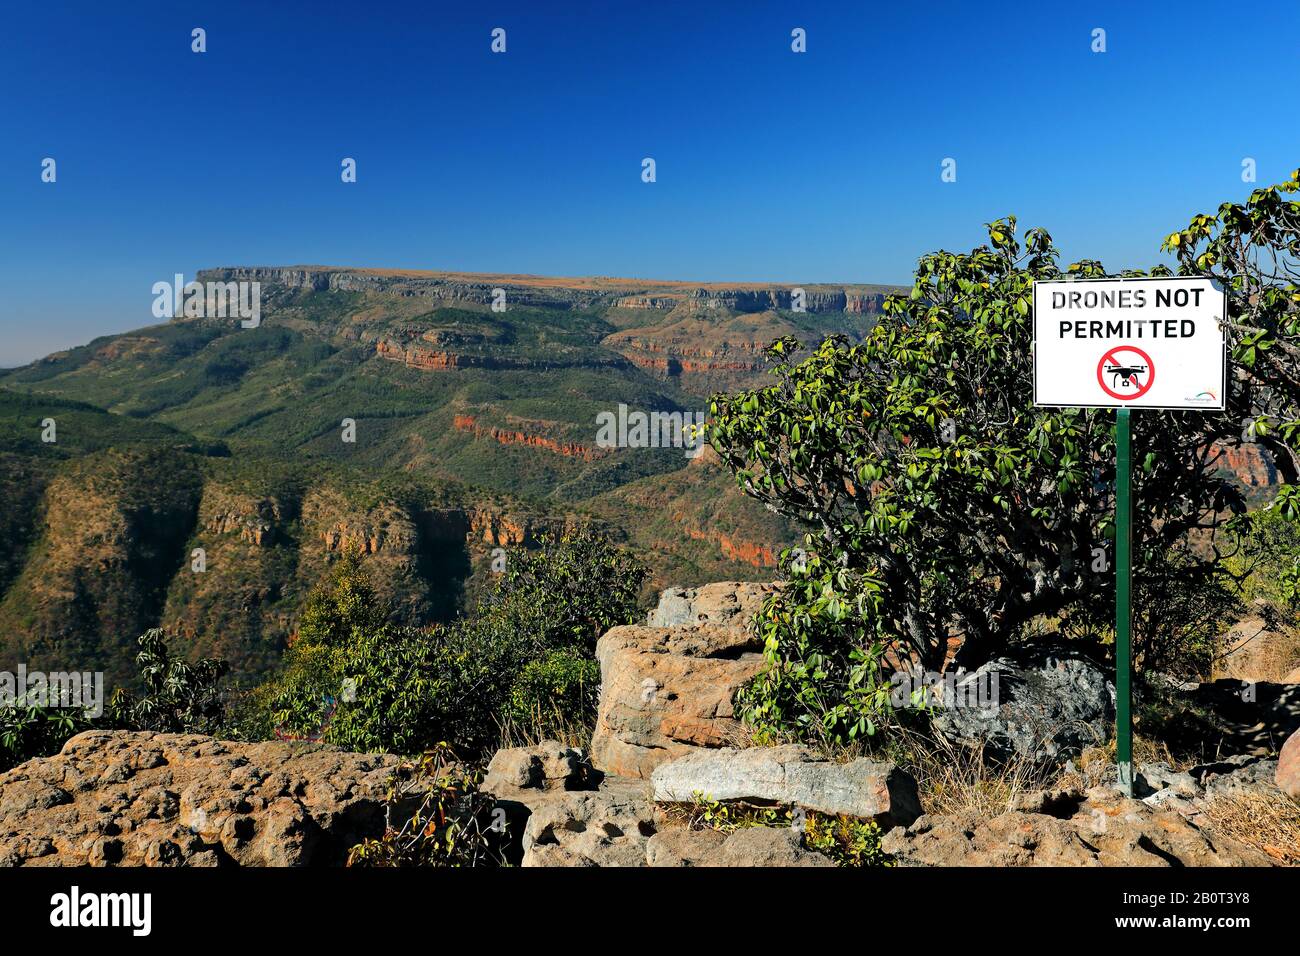 drone prohibition sign in the Blyde River Canyon Nature Reserve, South Africa, Blyde River Canyon Nature Reserve, Graskop Stock Photo